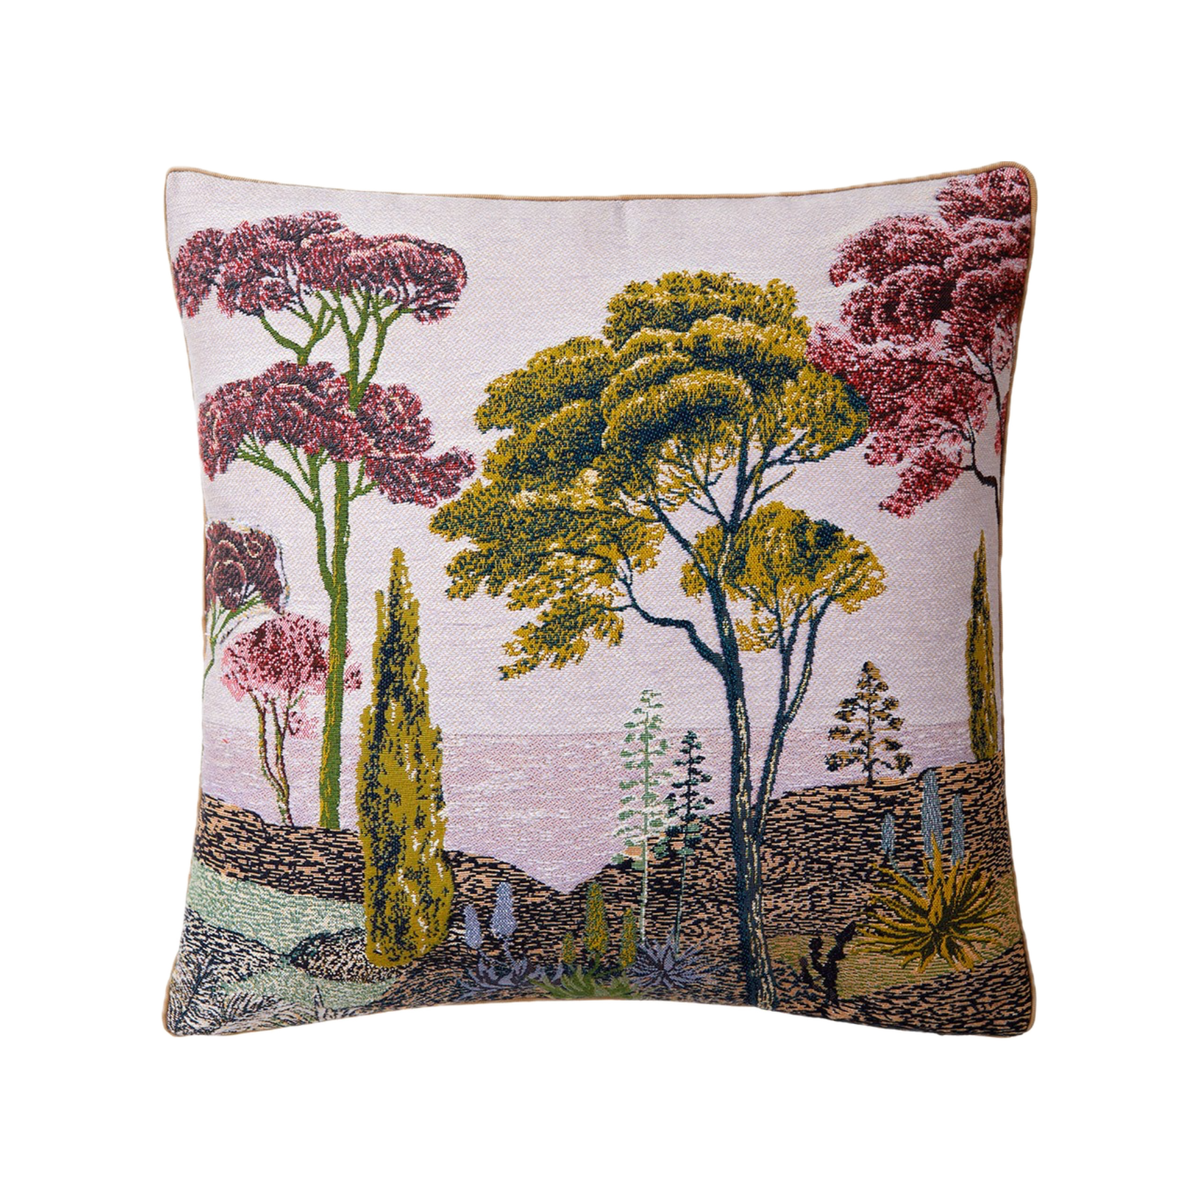 Decorative Pillow of Yves Delorme Parc Bedding in Parme Design